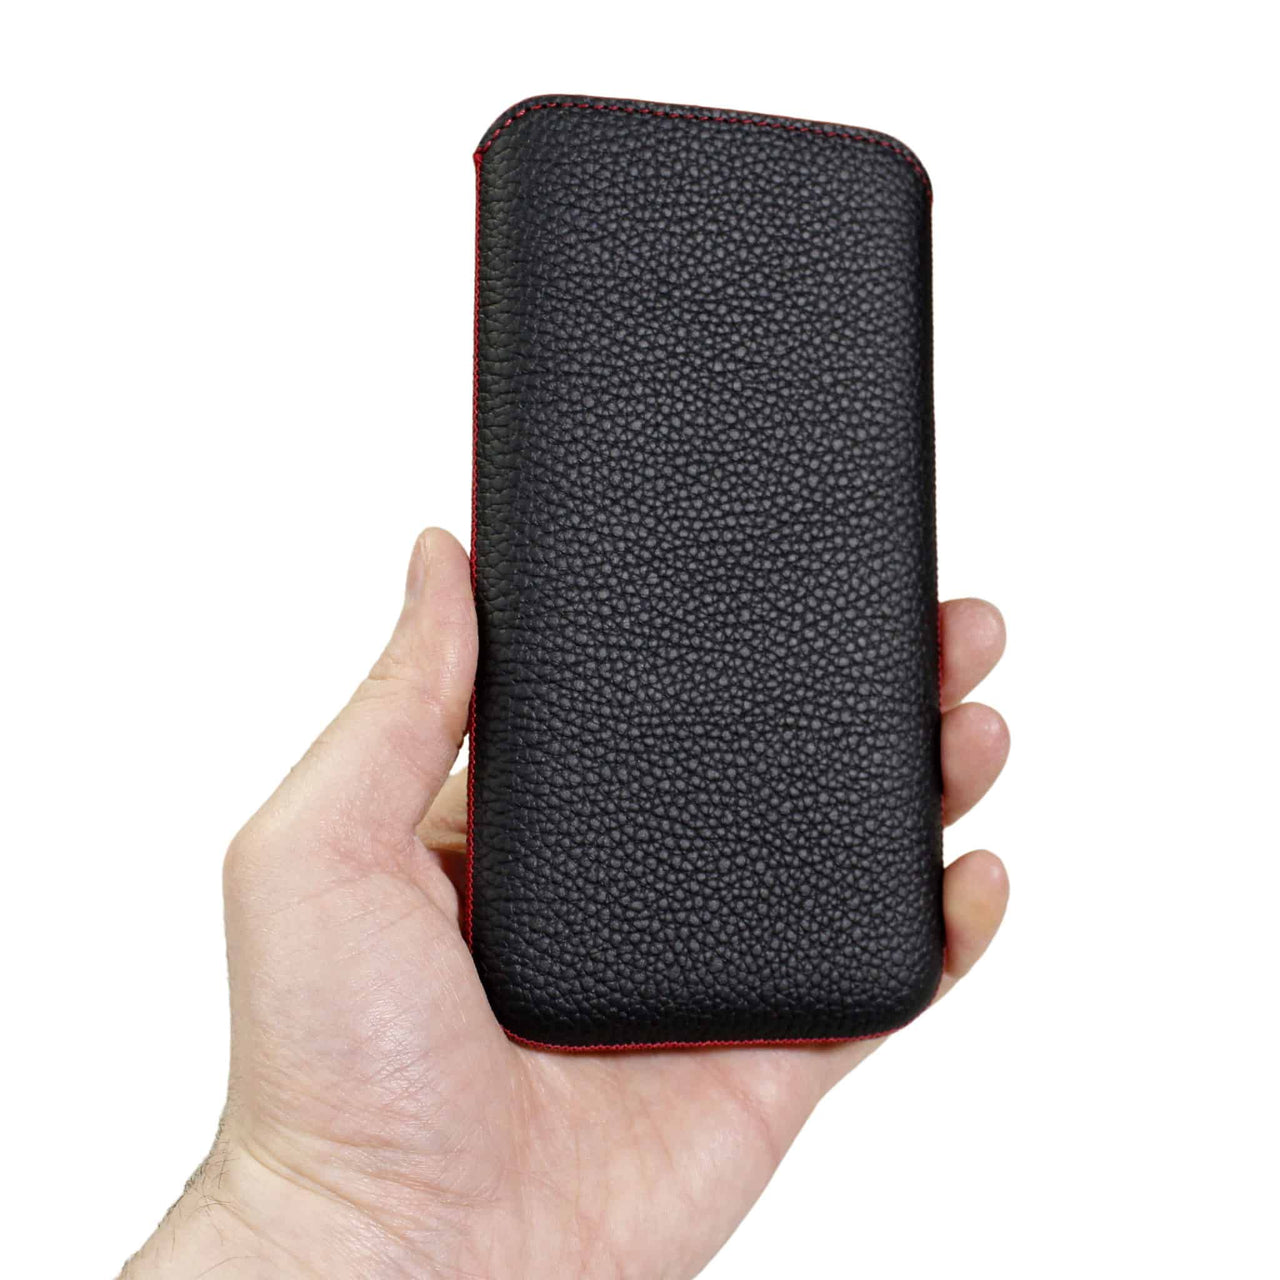 iPhone X / XS Genuine Leather Pouch Sleeve Case | Artisanpouch